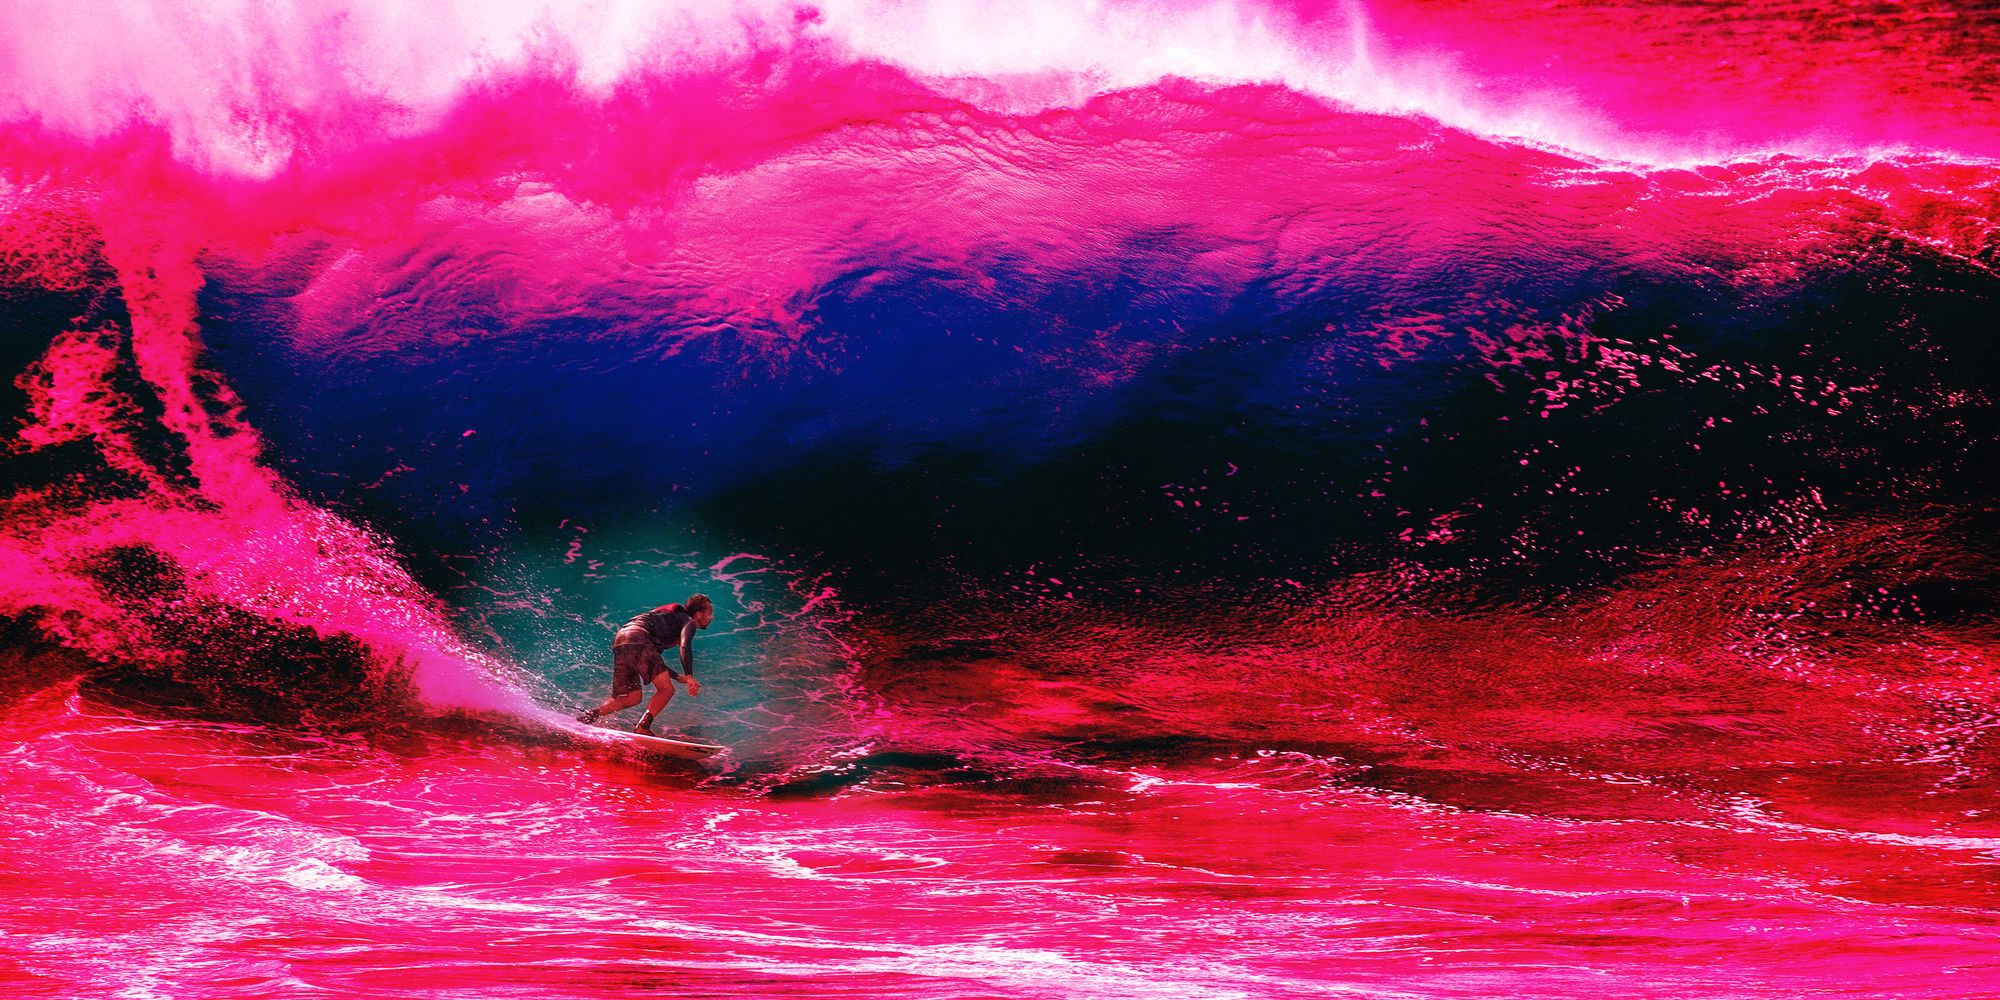 Texas Outlaw Writers Newsletter: Surfing the Red Wave Edition